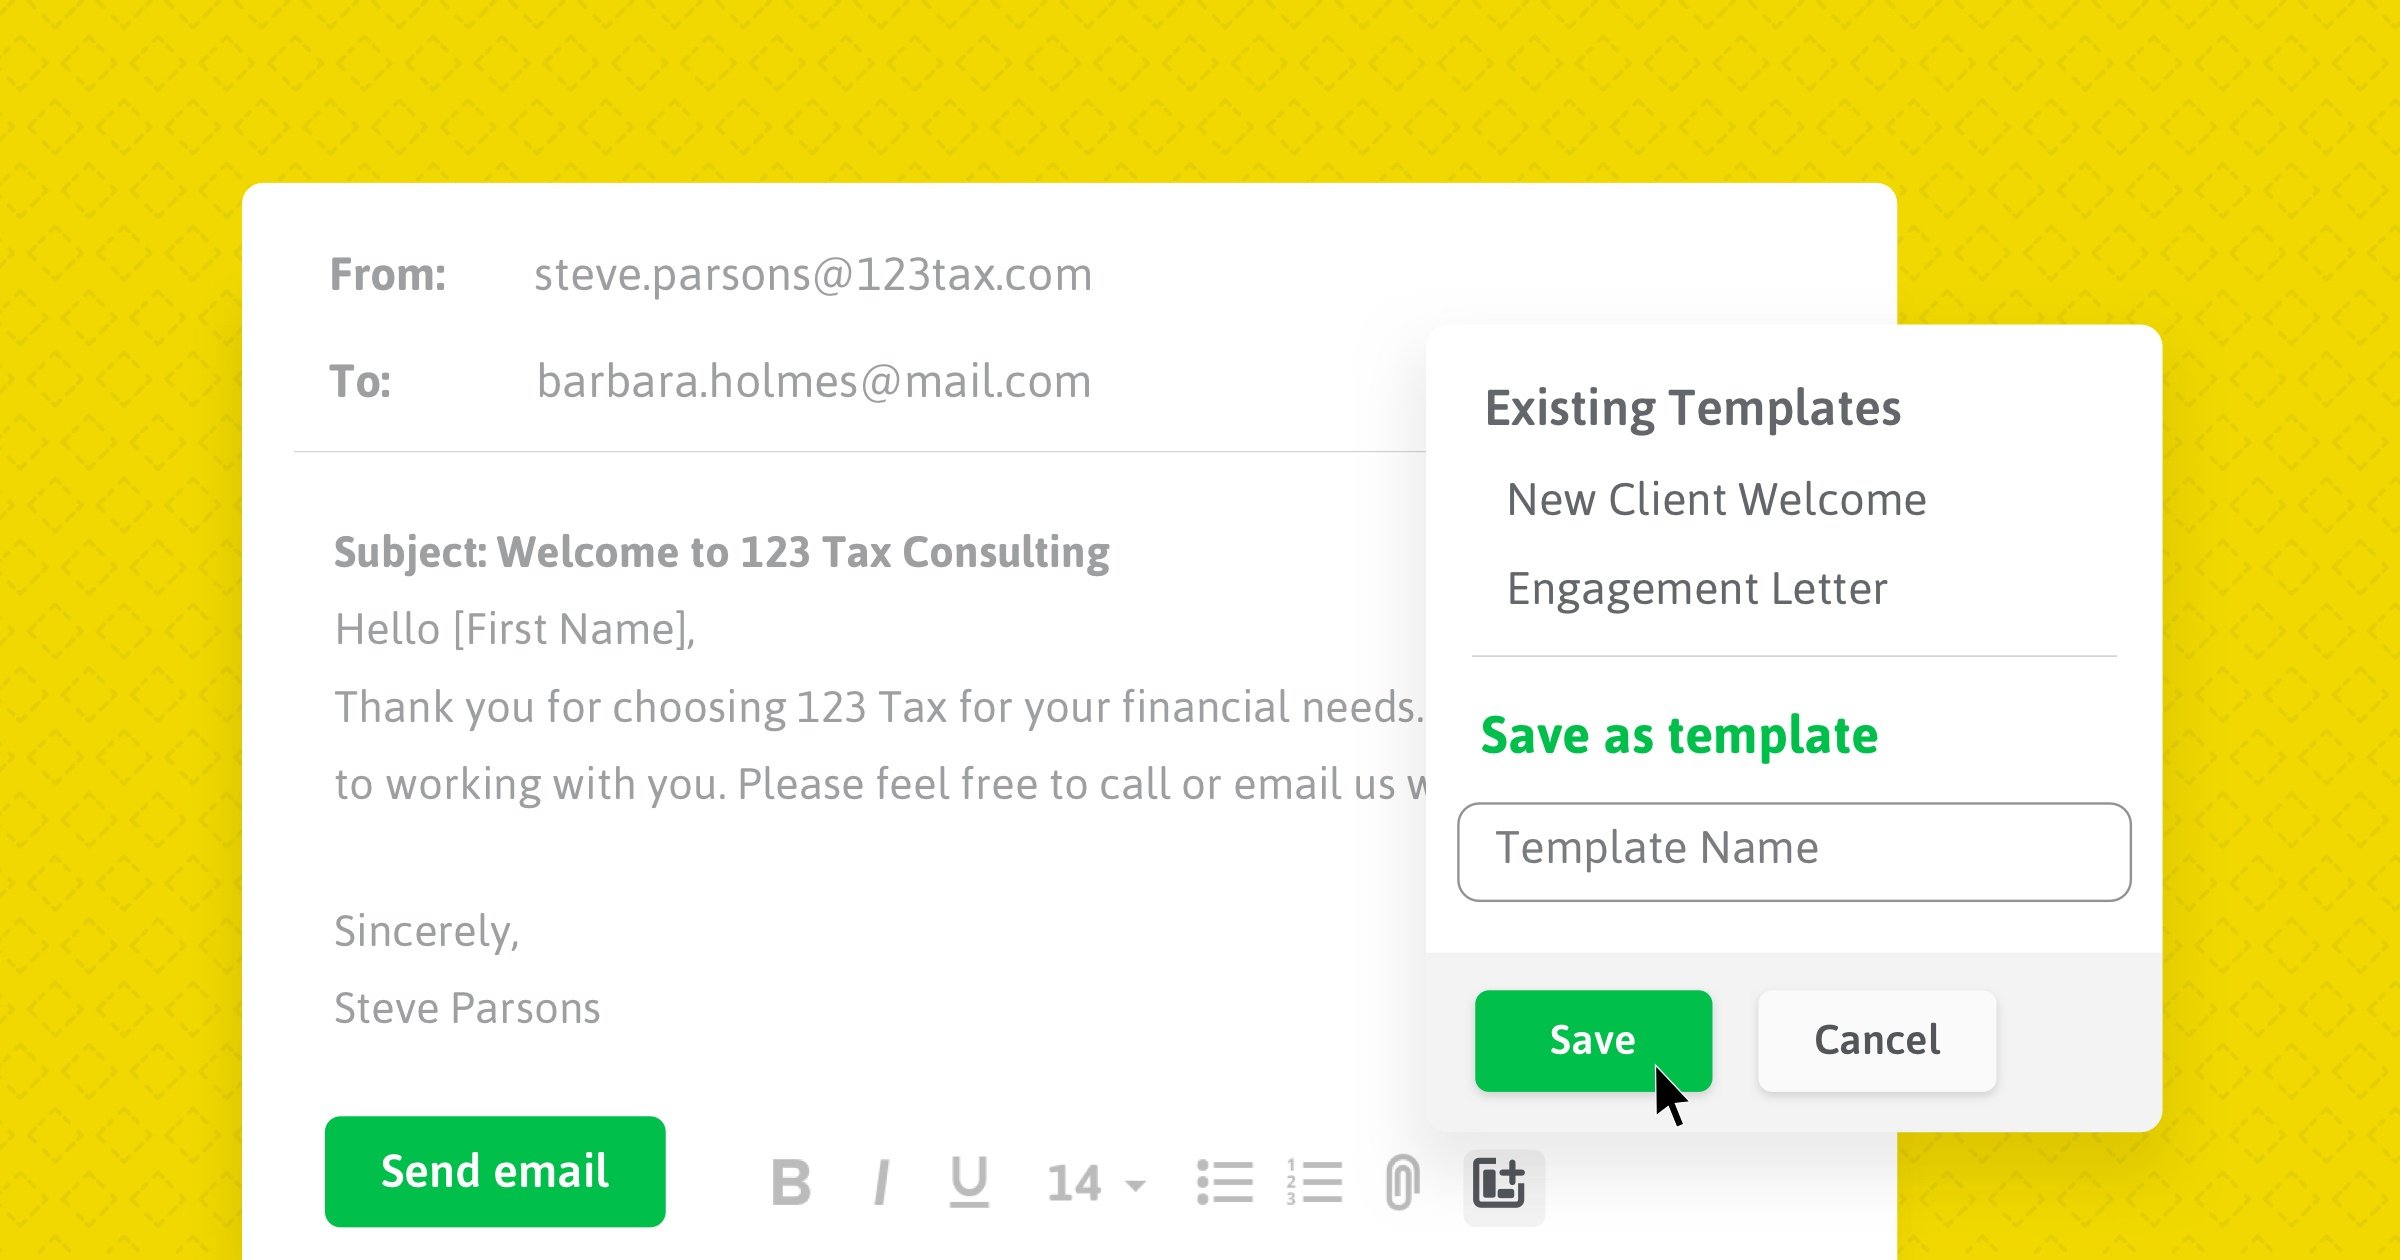 Feature Update: Spend Less Time on Email by Using Templates